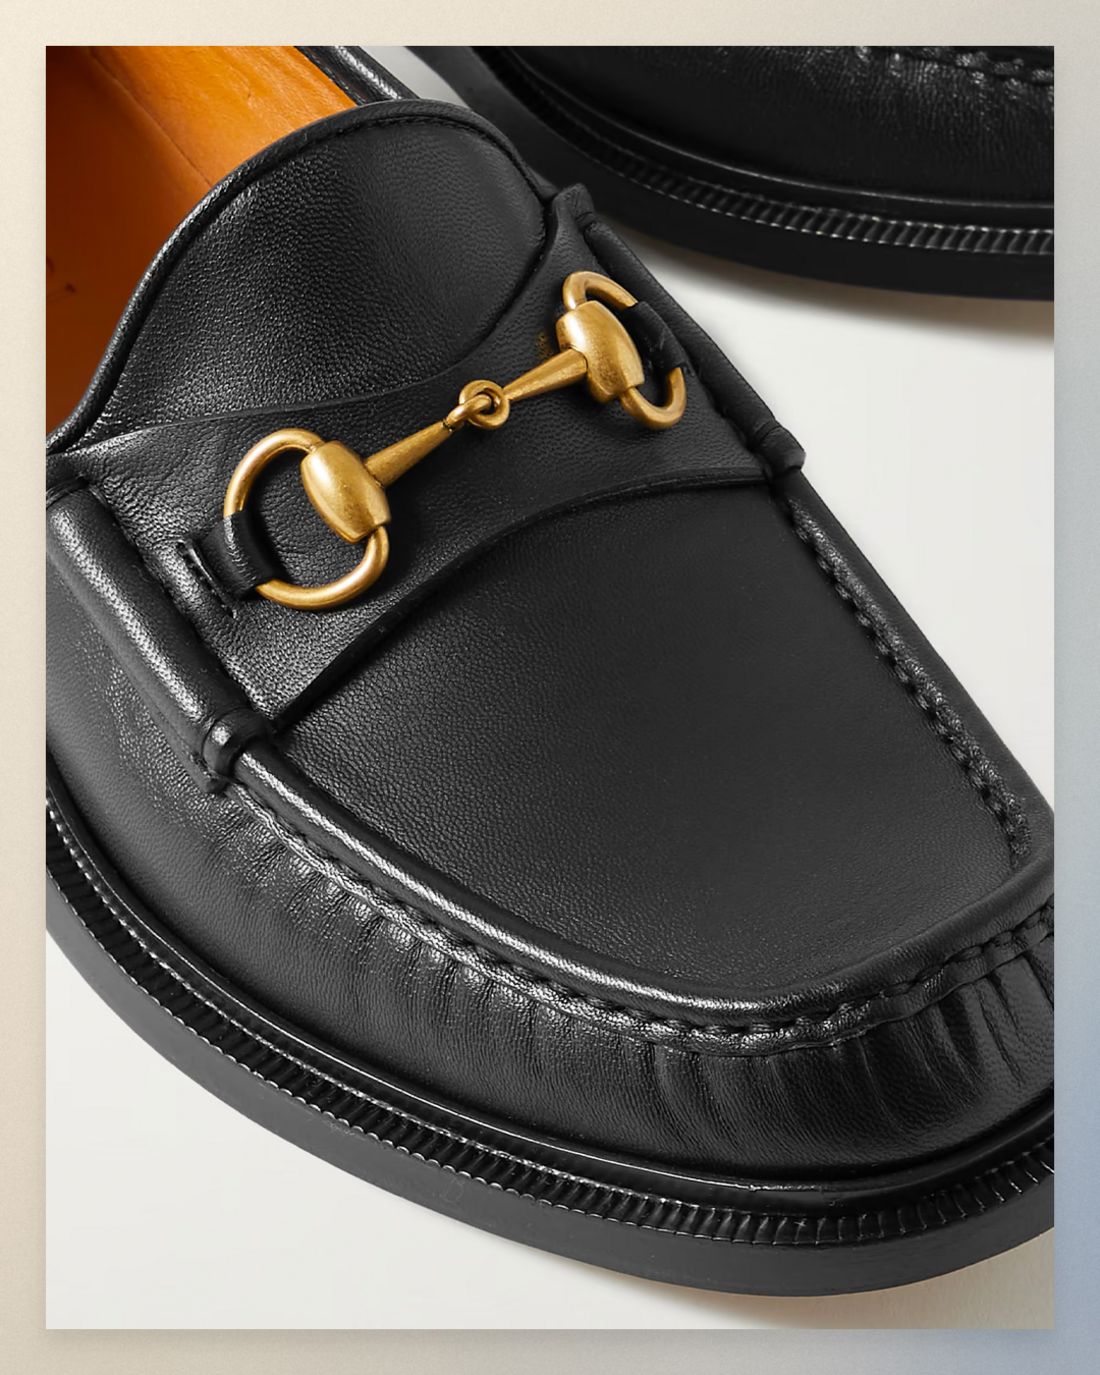 Fashion: Loafer Love – Seven Pairs For Many Wears | The Journal | MR PORTER